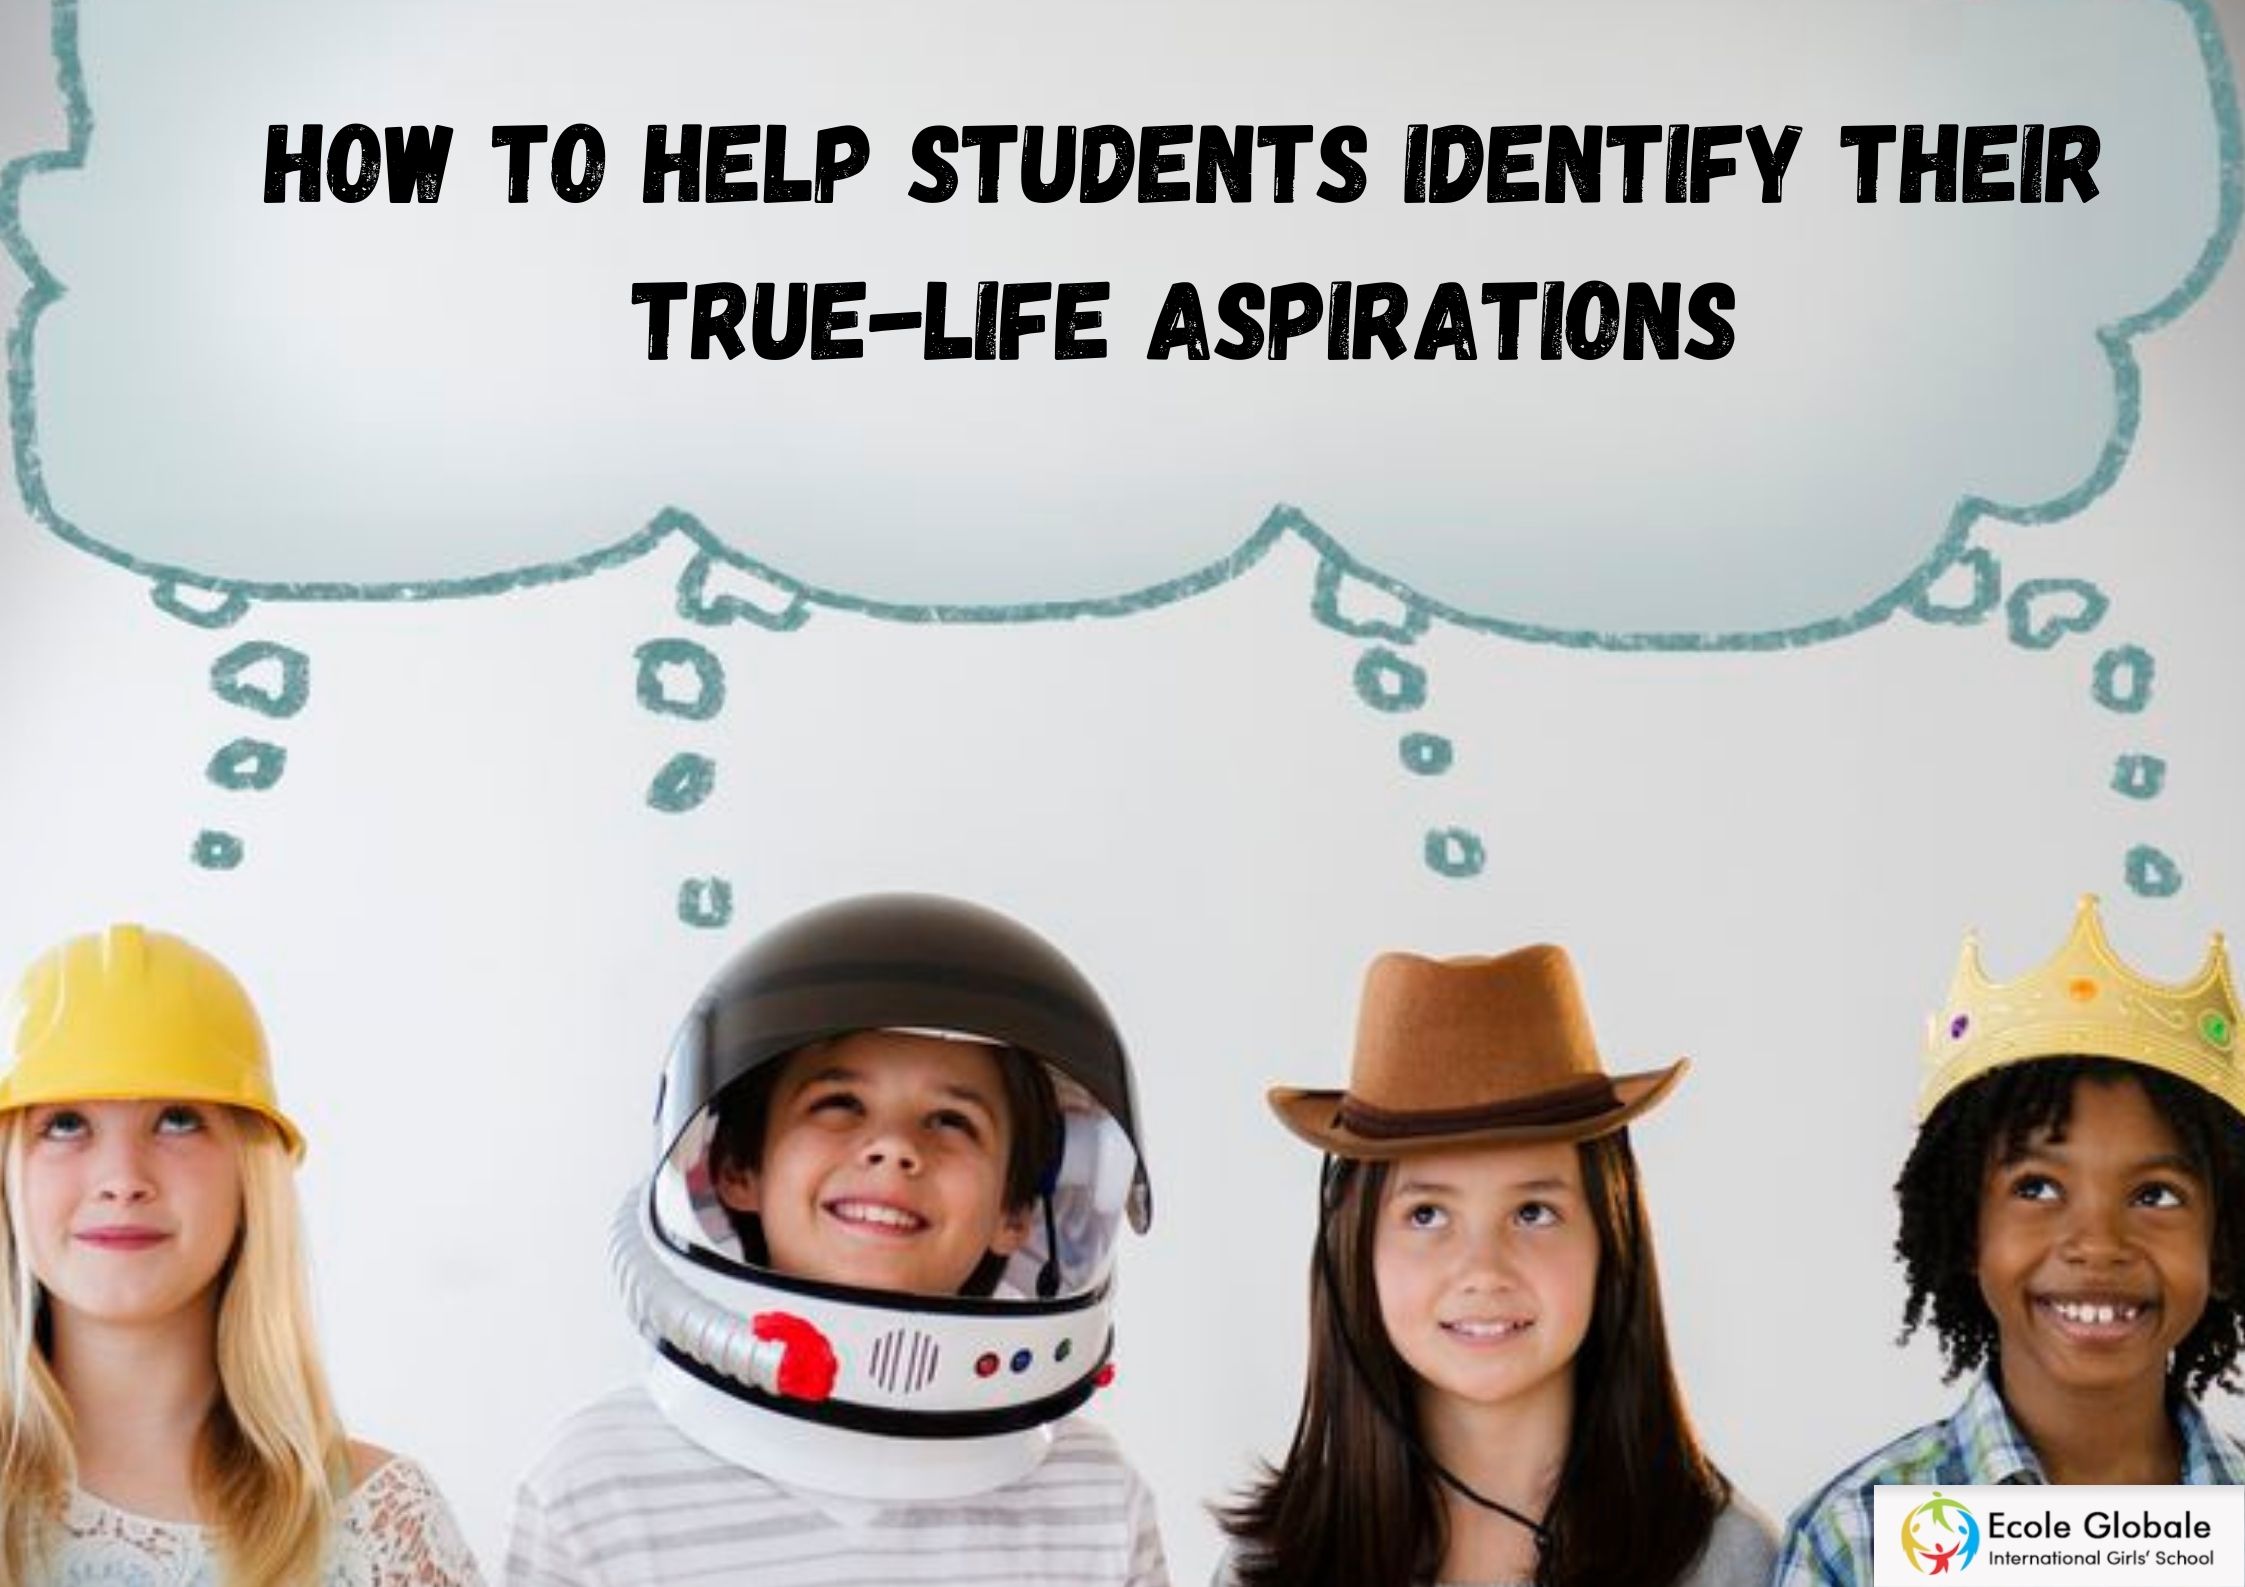 HOW TO HELP STUDENTS IDENTIFY THEIR TRUE-LIFE ASPIRATIONS